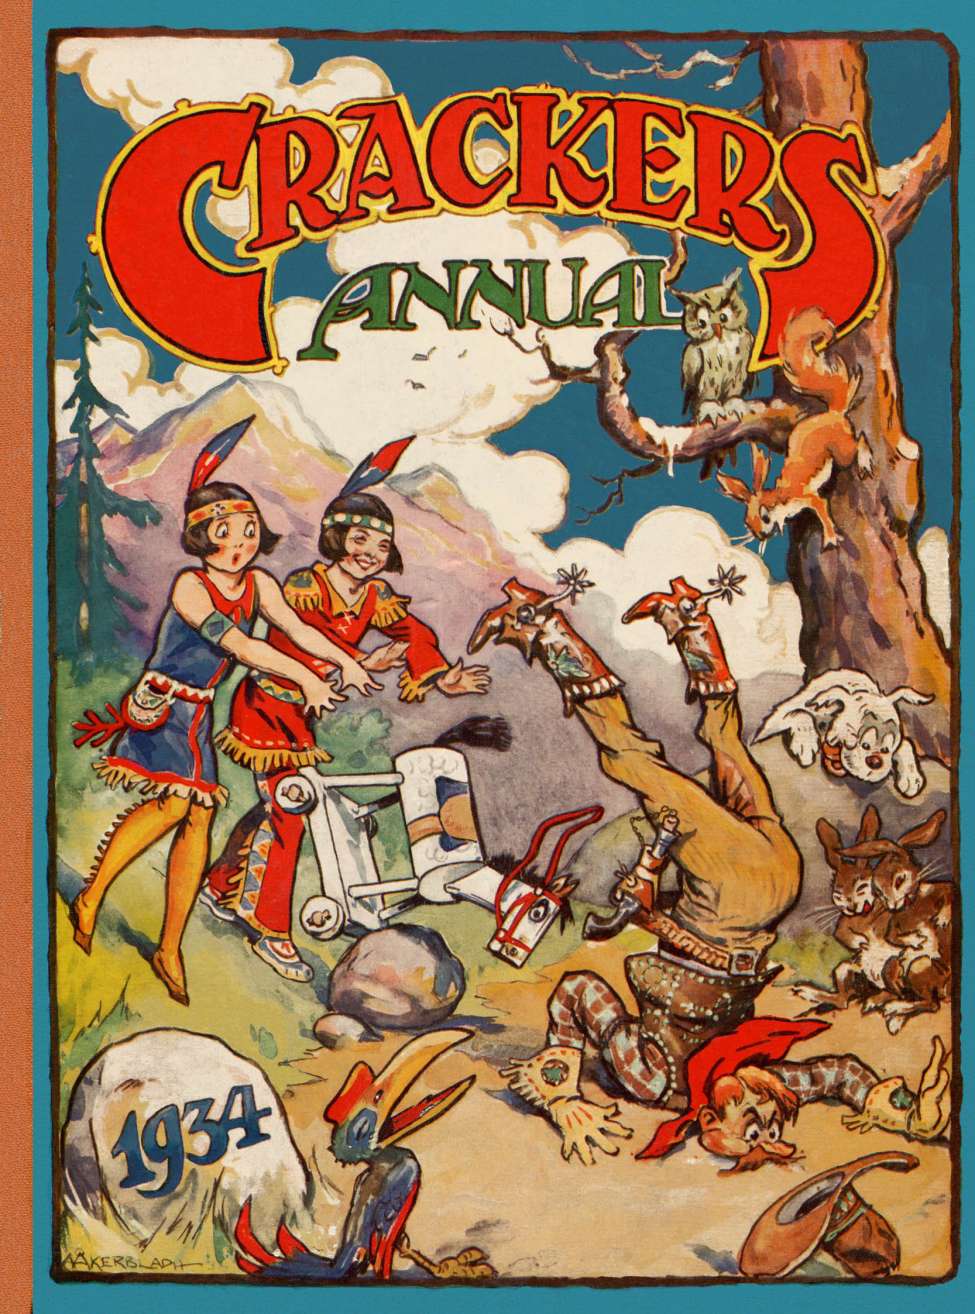 Comic Book Cover For Crackers Annual (1934)